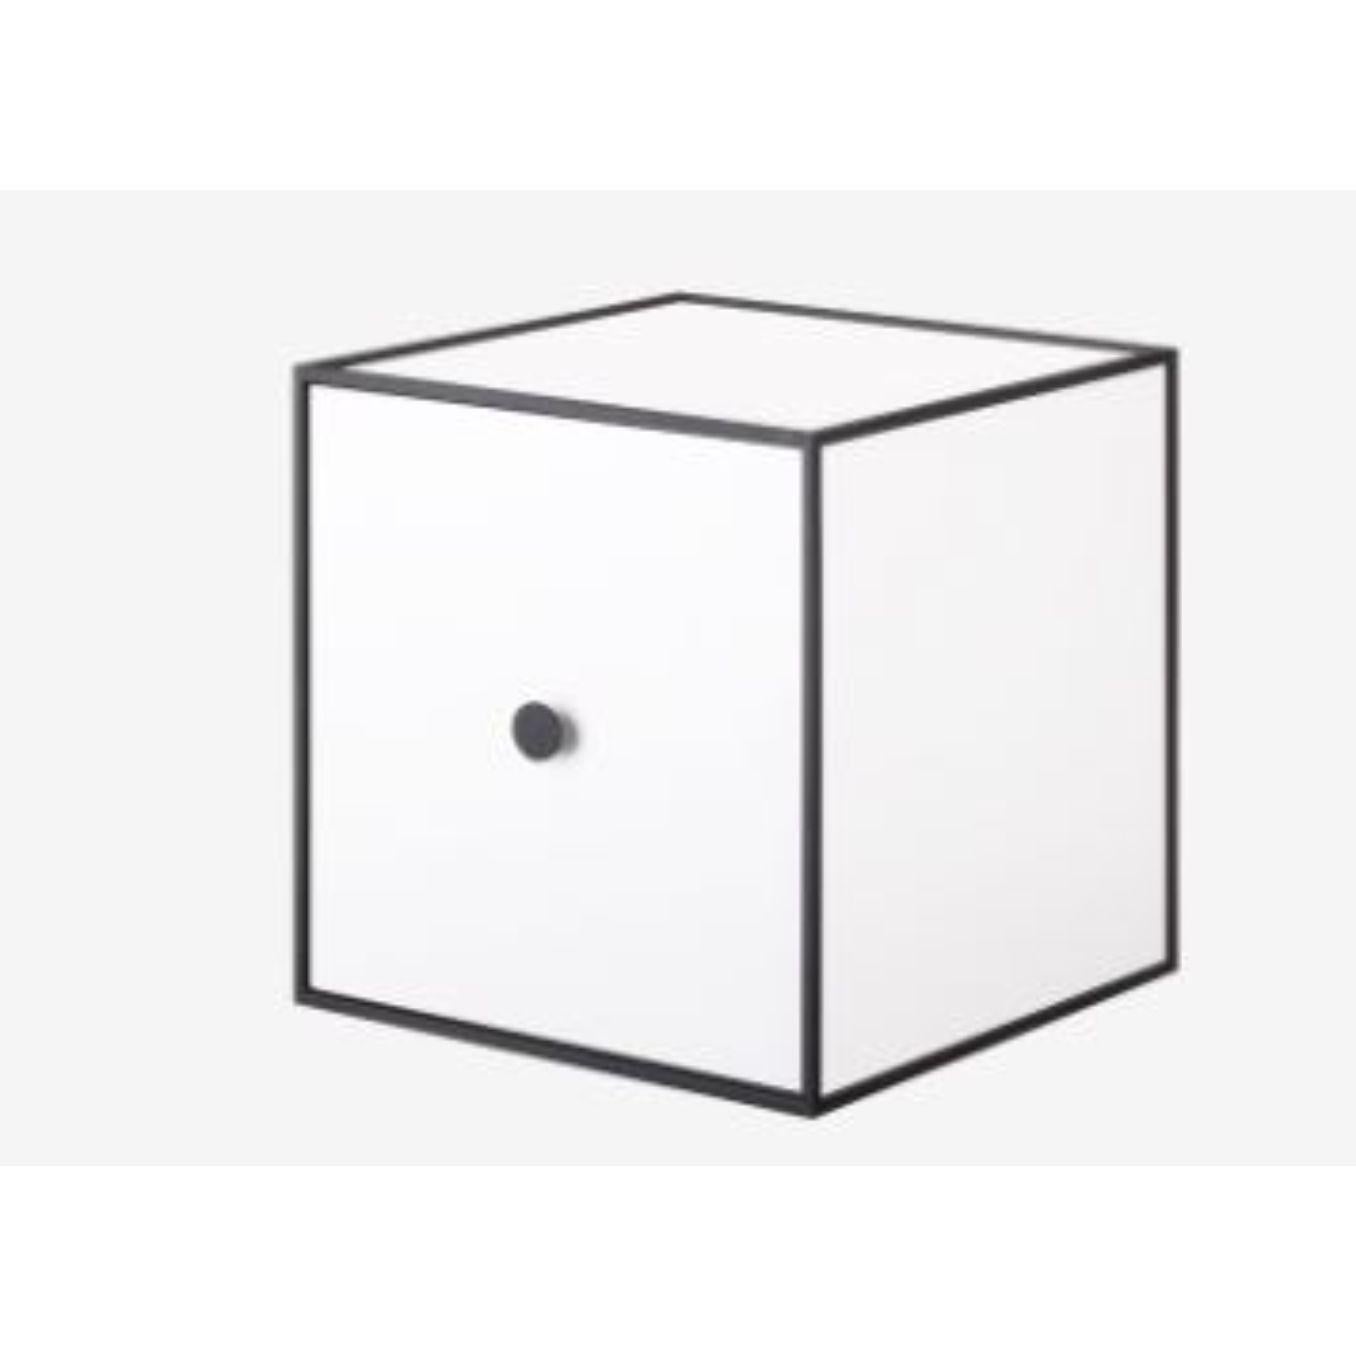 35 white frame box with door by Lassen
Dimensions: W 35 x D 35 x H 35 cm 
Materials: Finér, Melamin, Melamin, Melamine, metal, veneer
Also available in different colours and dimensions.

By Lassen is a Danish design brand focused on iconic